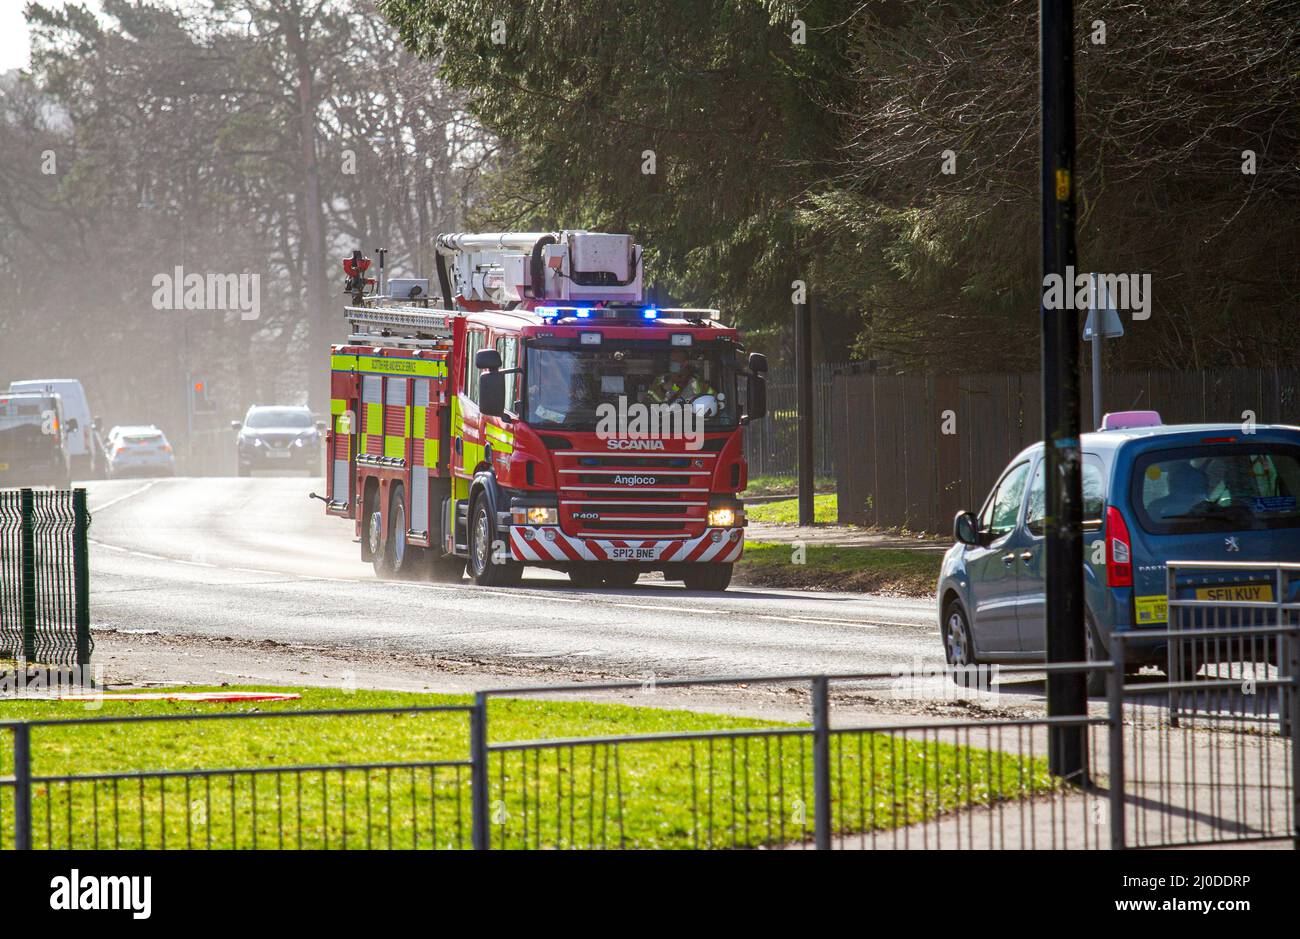 A Scottish Fire and Rescue Service fire engine responds at high speed to an emergency 999 call along MacAlpine Road in Ardler, Dundee, Sotland Stock Photo